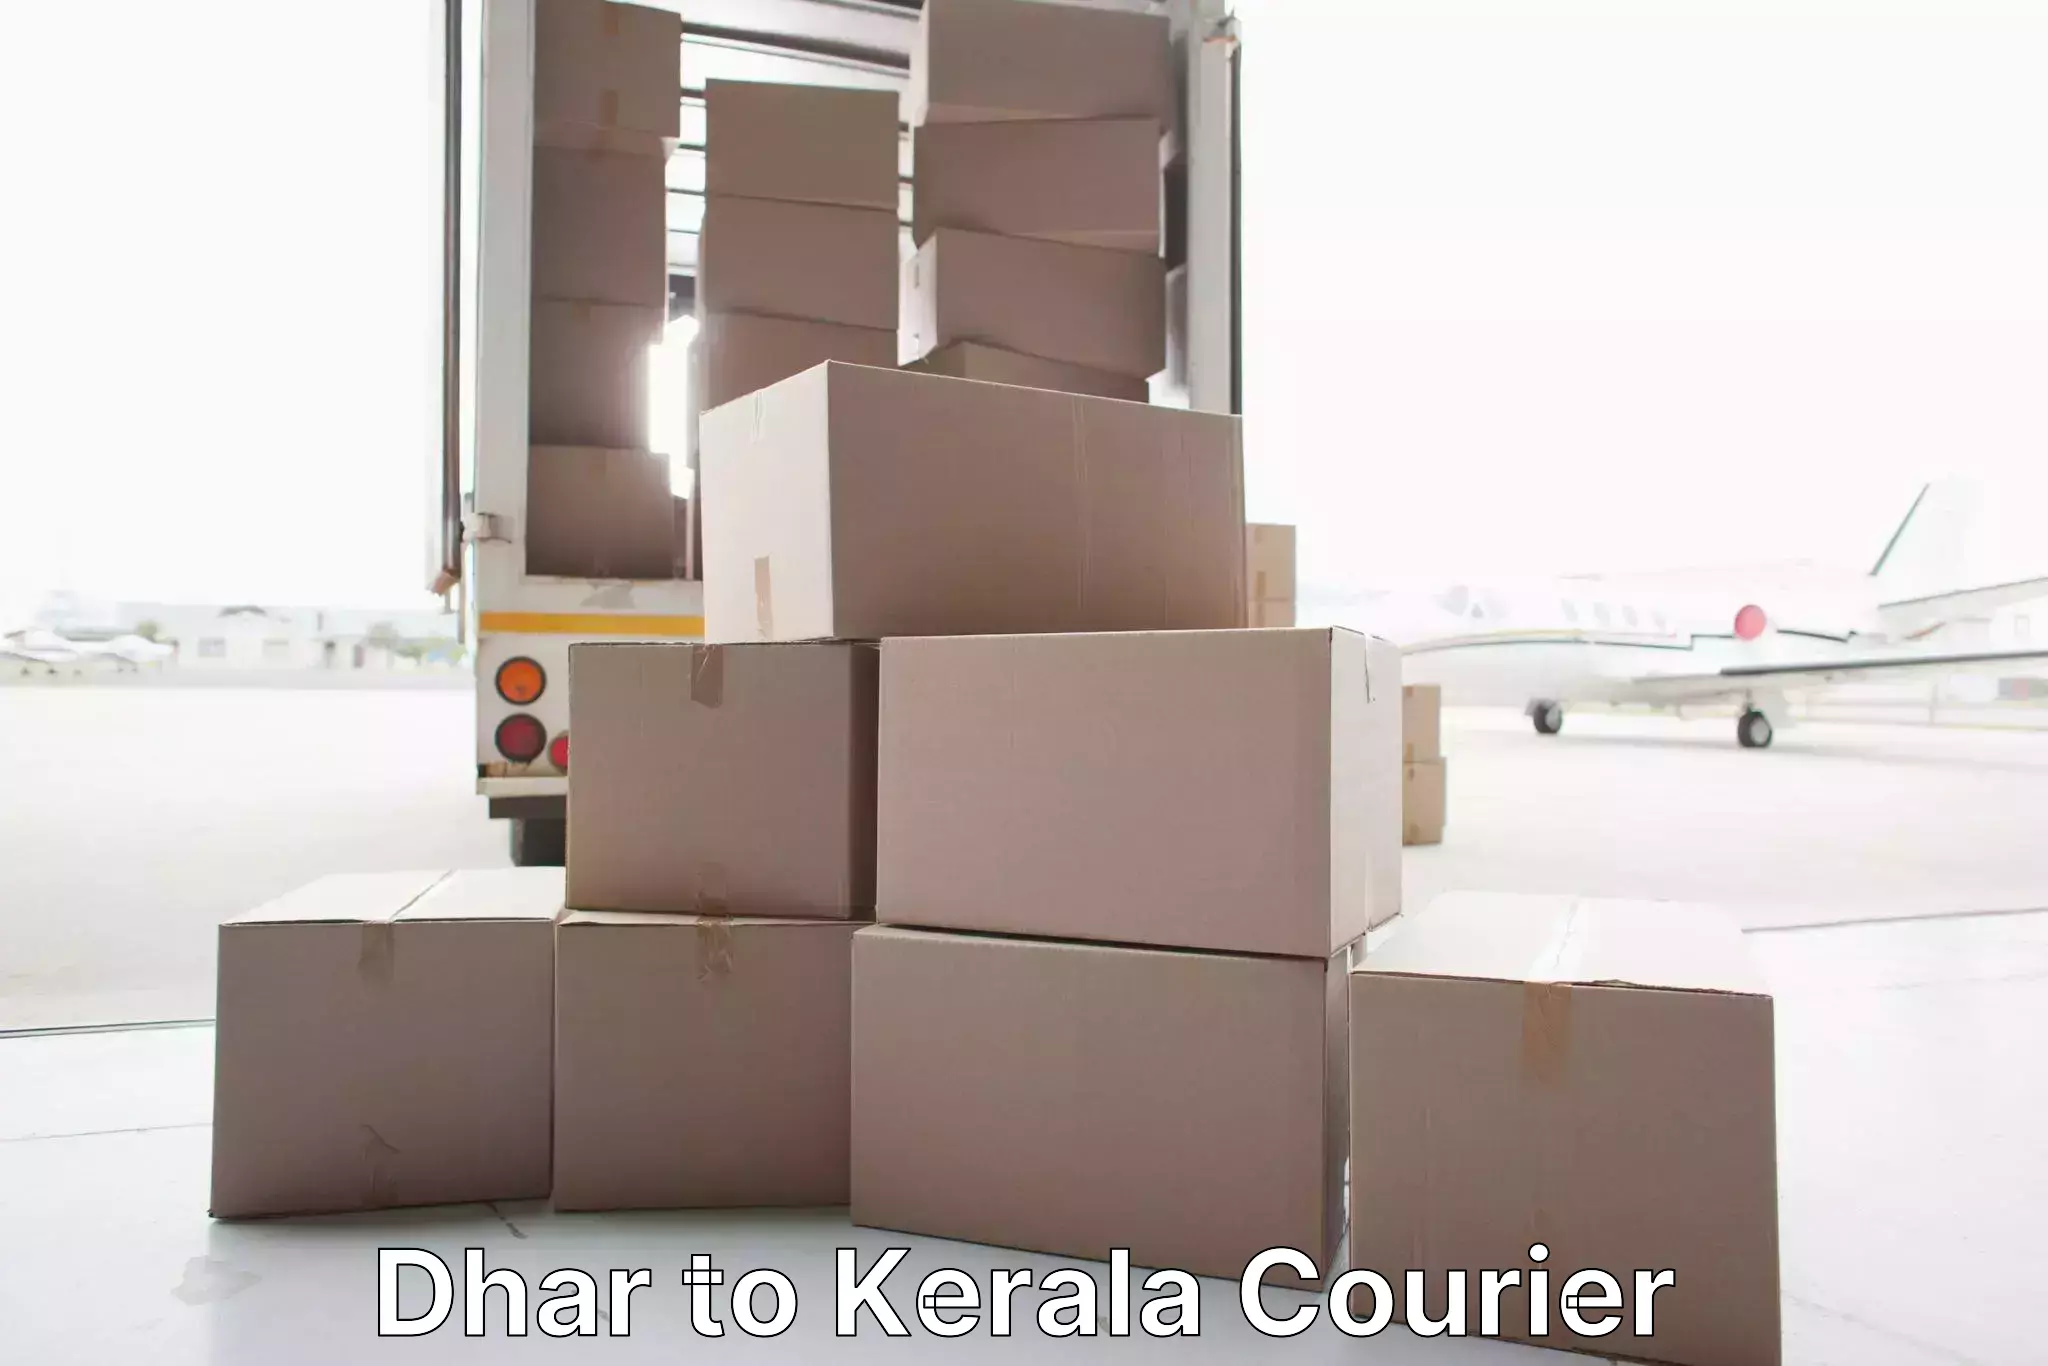 Quality moving and storage Dhar to Kerala